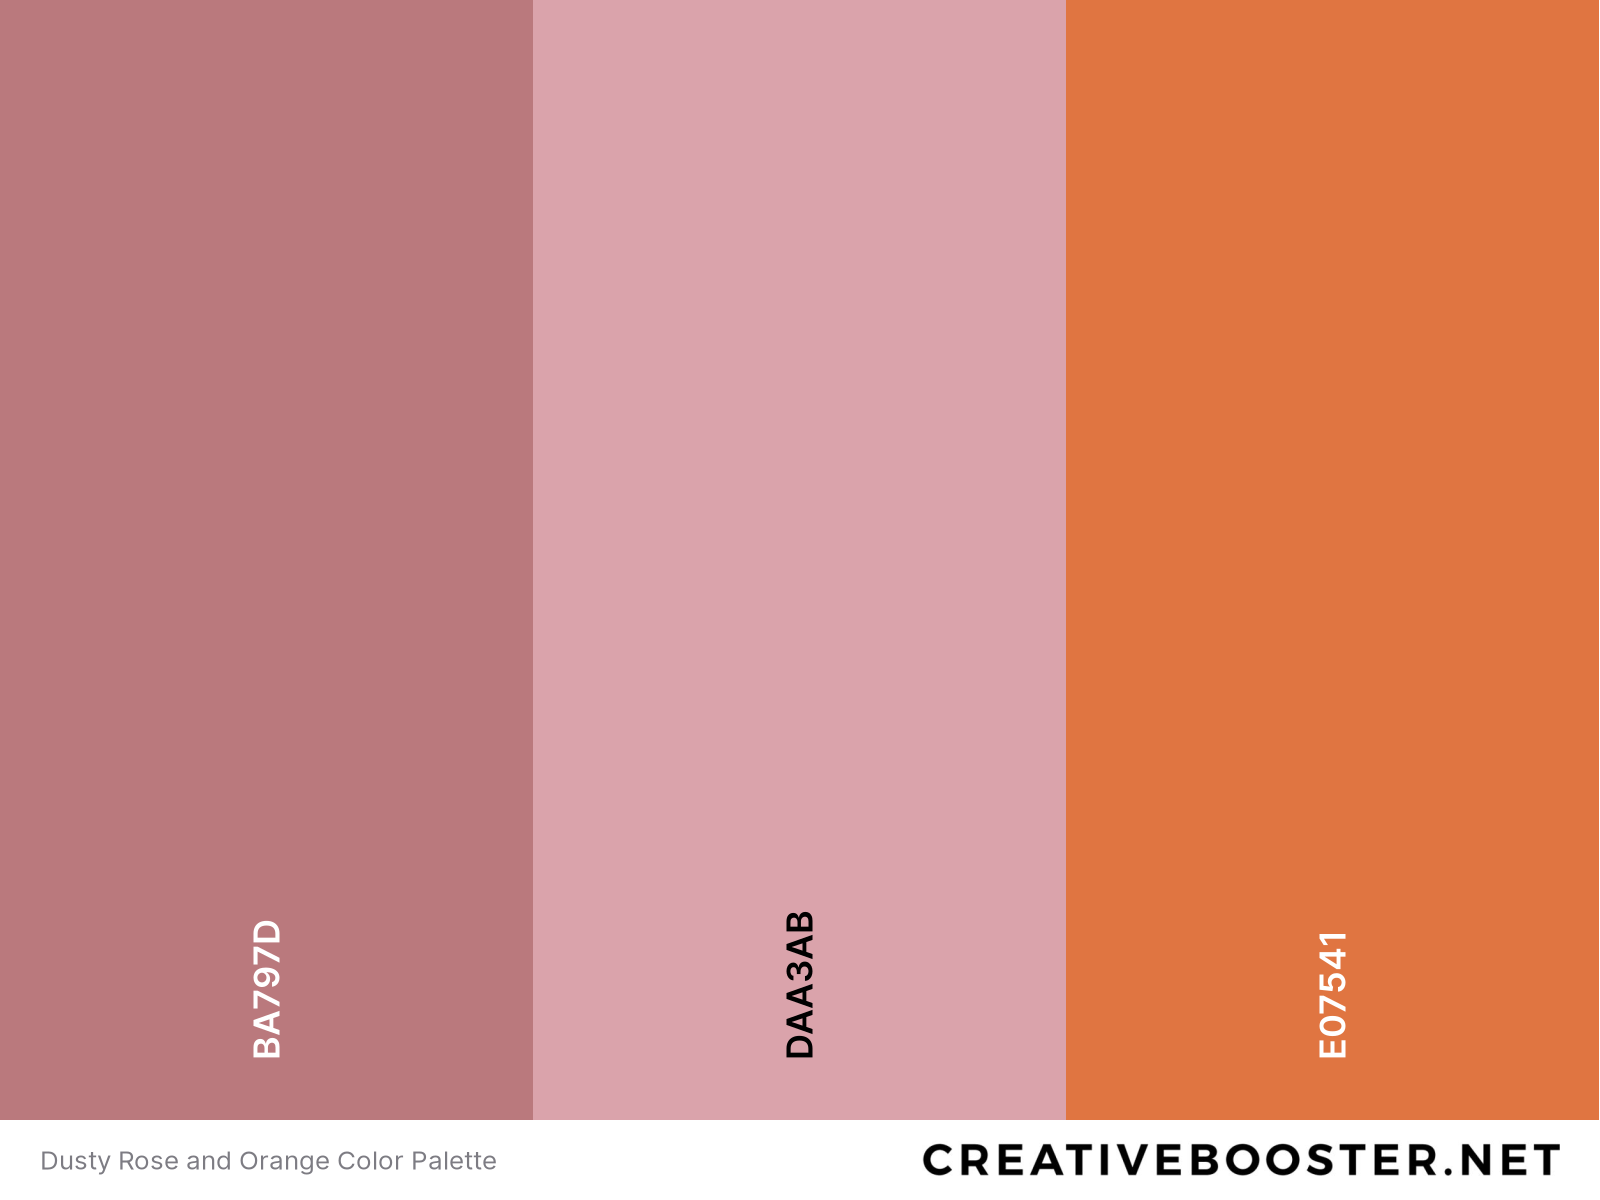 Dusty Rose and Orange Color Palette